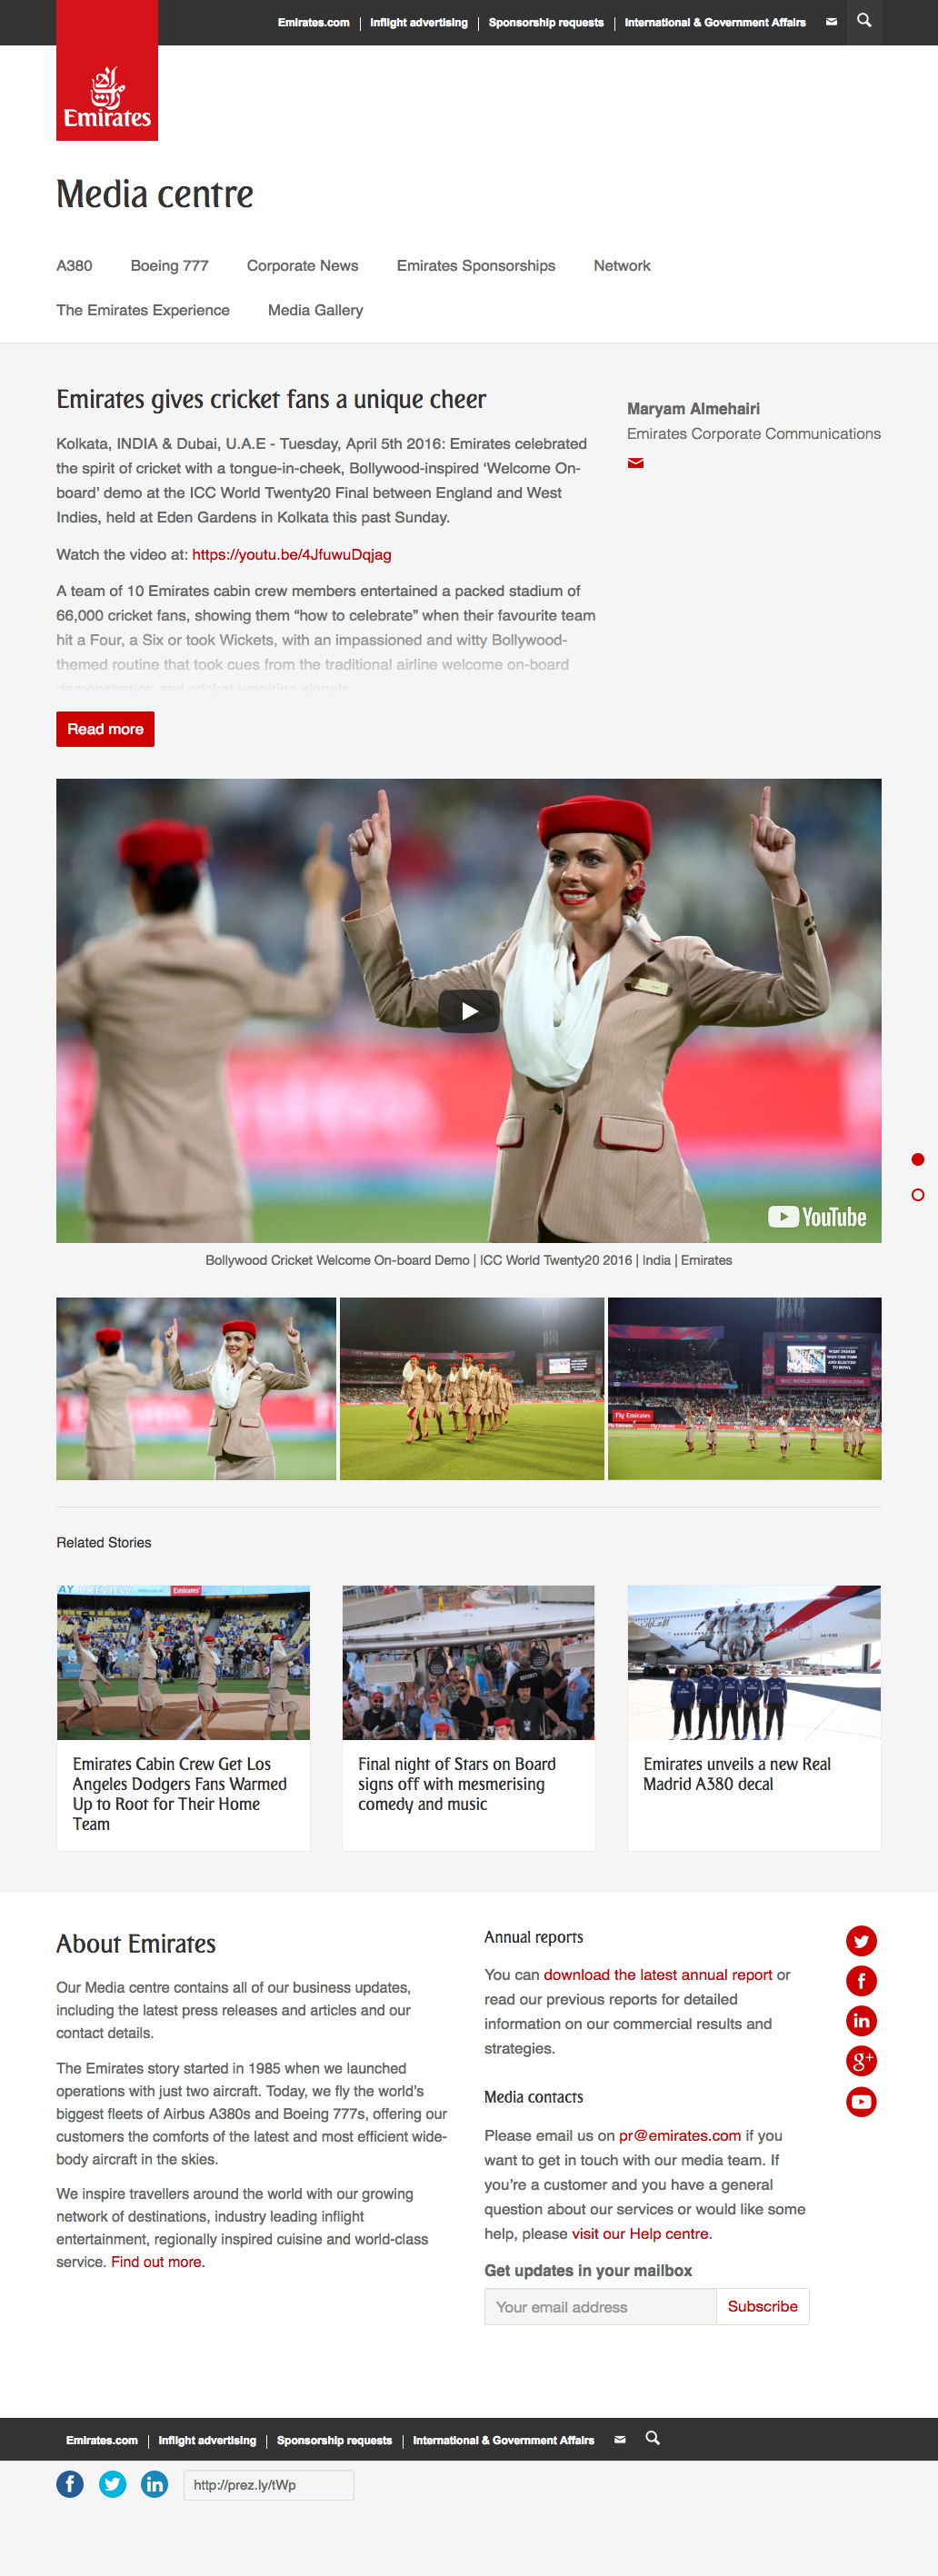 Emirates gives cricket fans a unique cheer